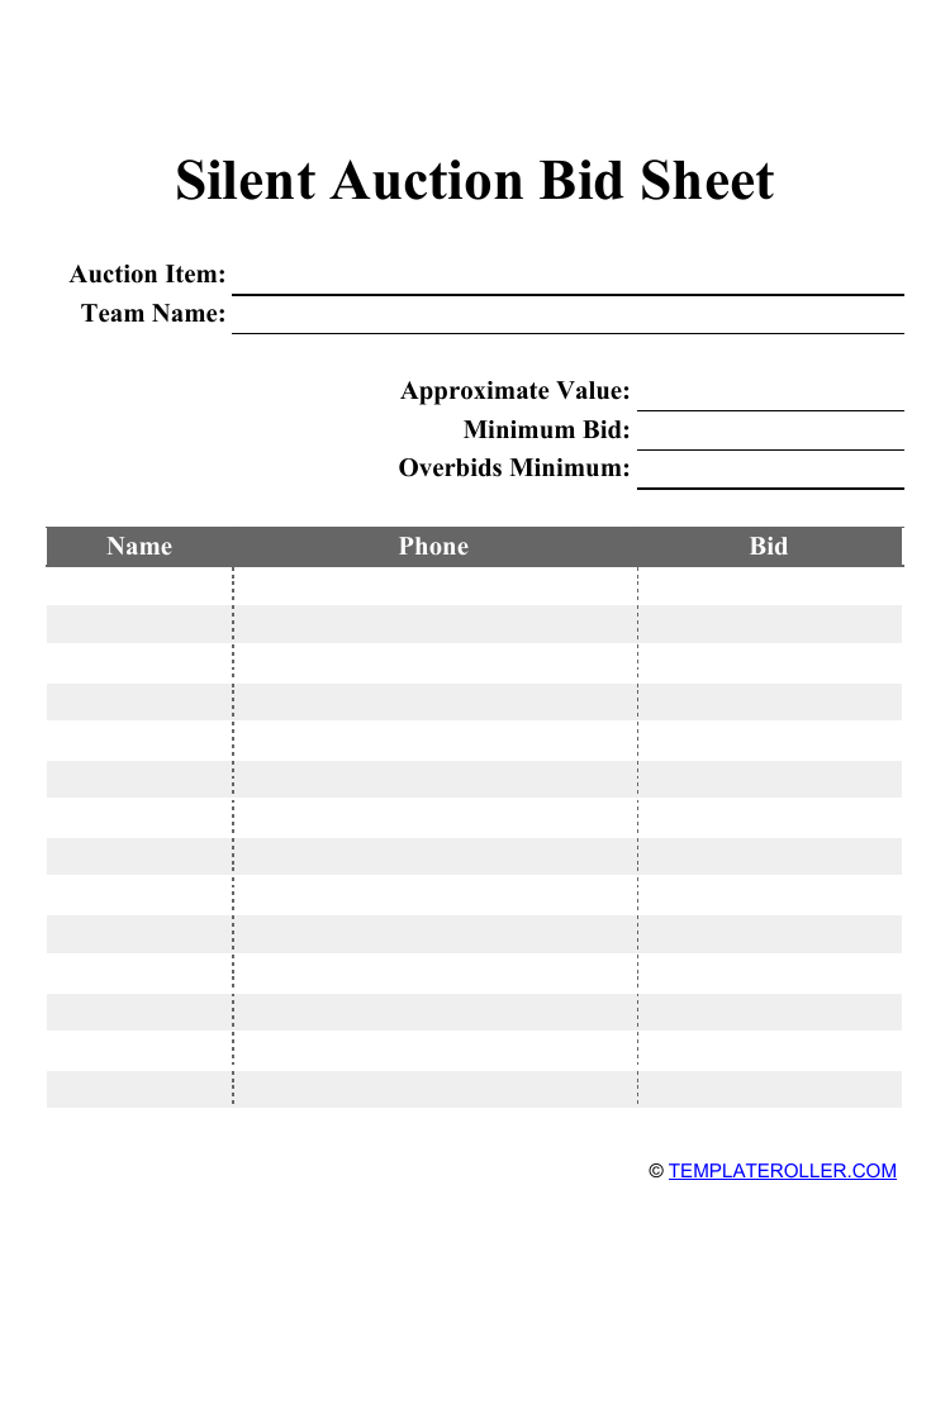 Silent Auction Bid Sheet Template, Page 1